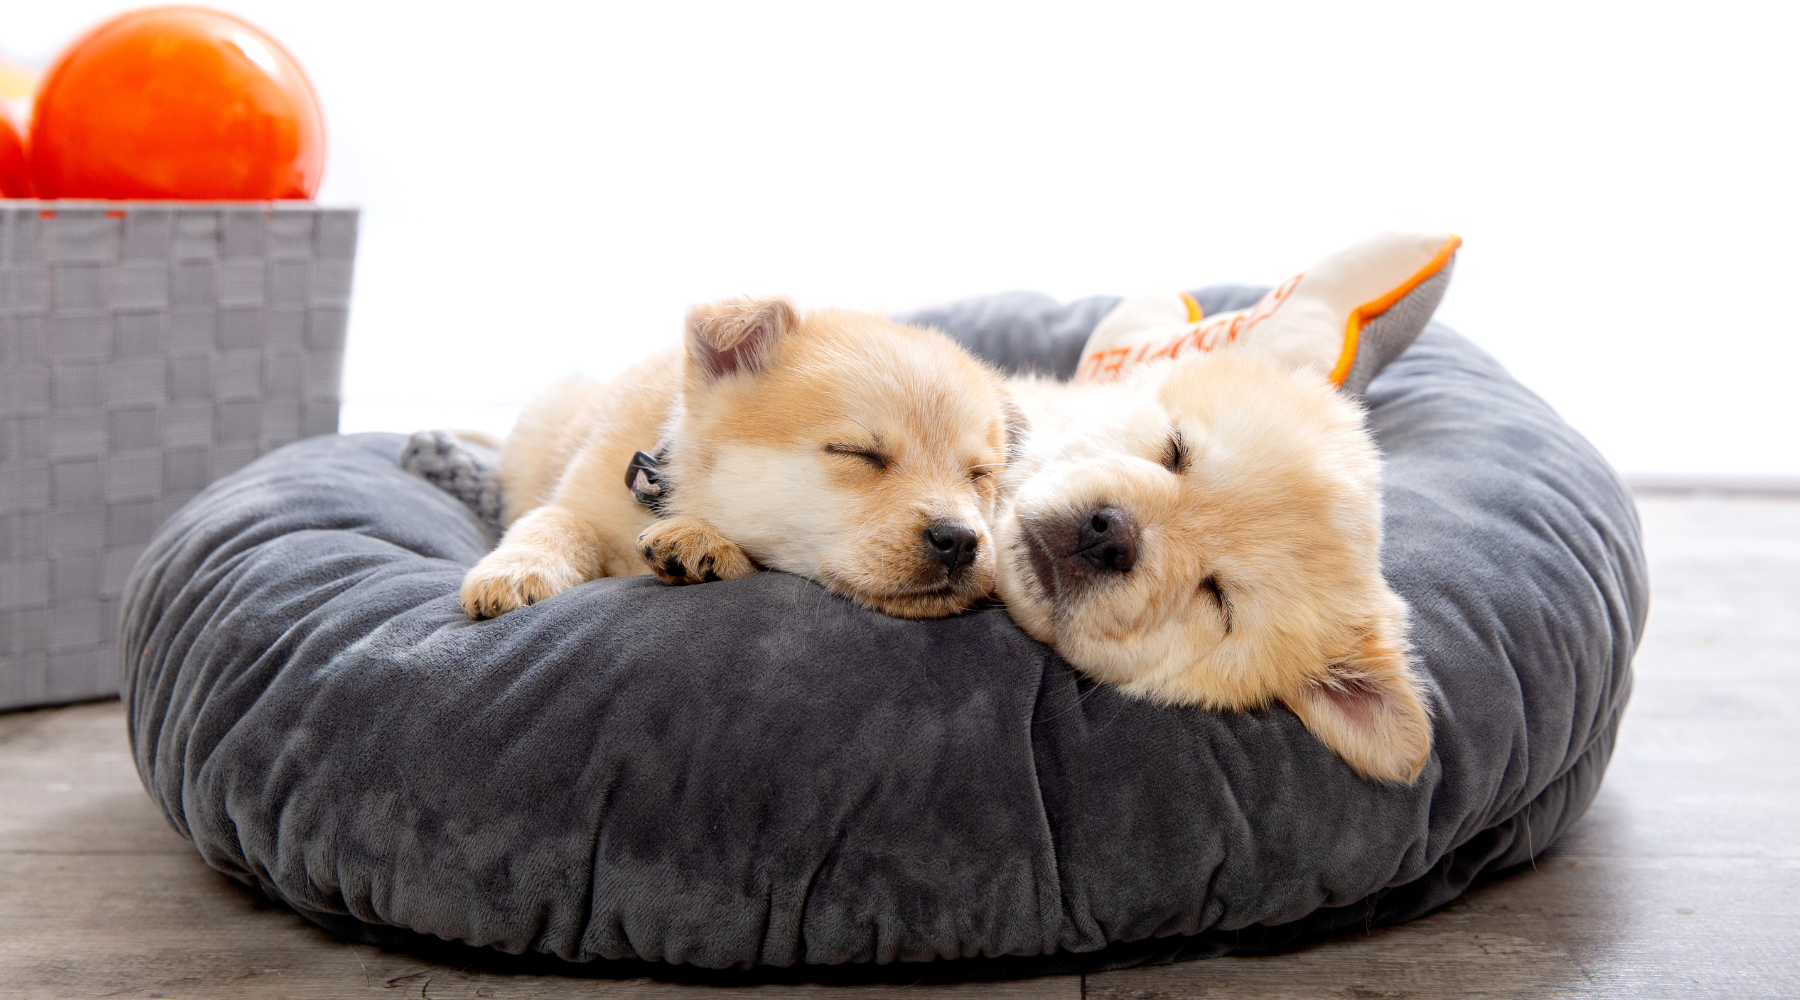 Puppies on a bed